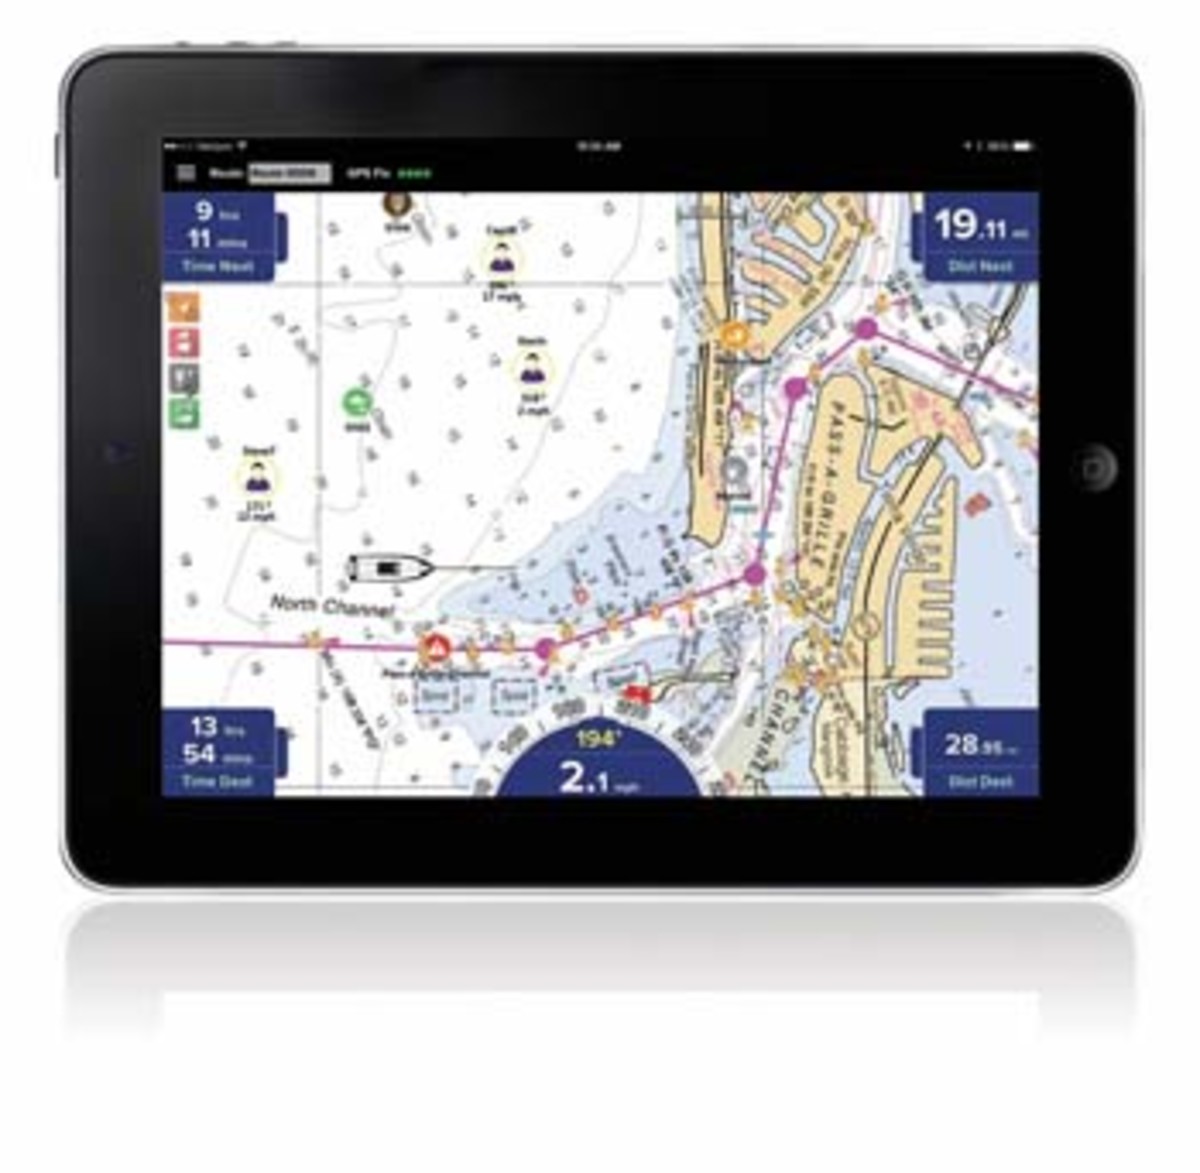 Jay Stipe pinpointed the location of his son Kevin’s boat on an iPad using Pro Charts’ “buddy” feature, then relayed the coordinates to the Coast Guard.